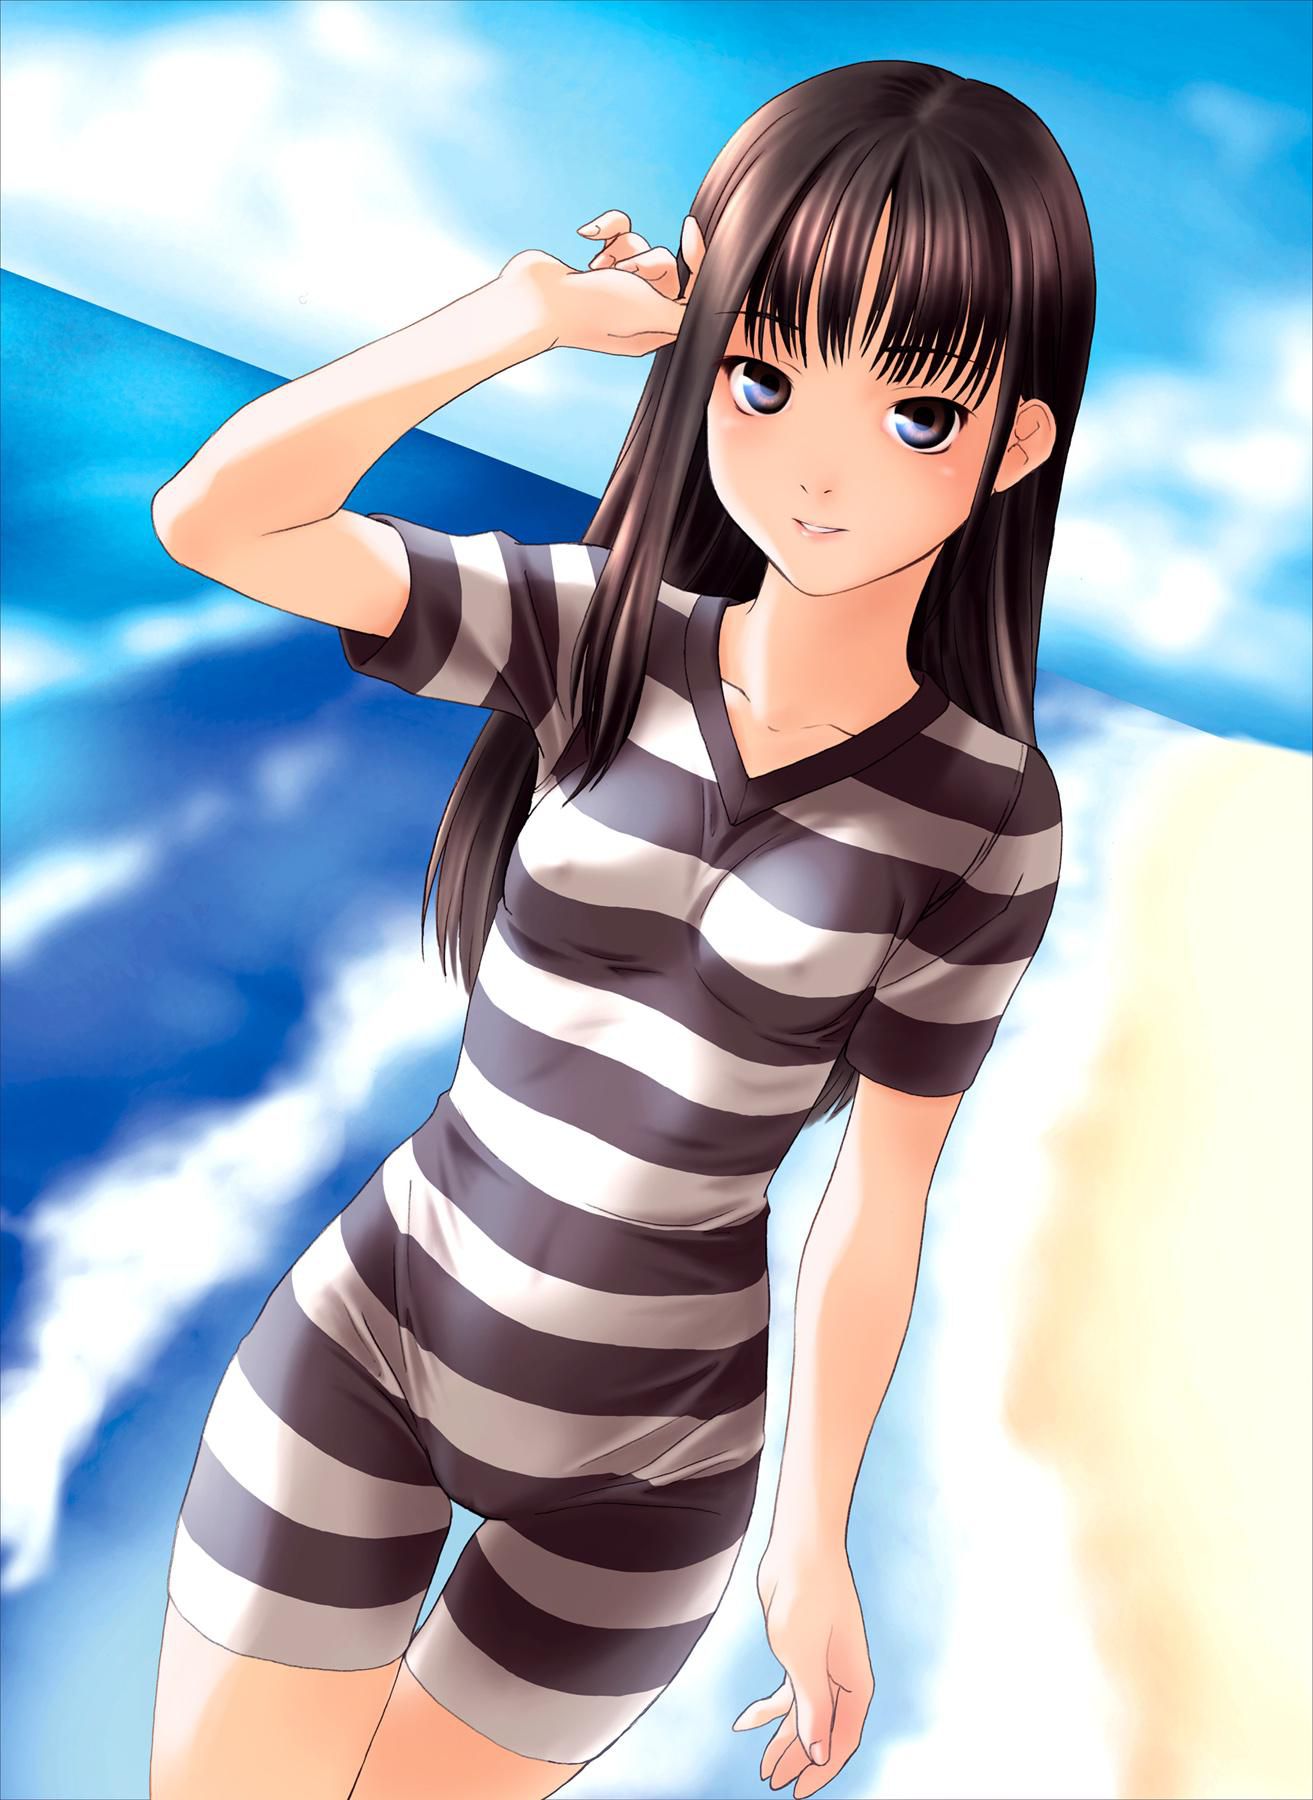 2-d black hair long girl is the cutest in the world! 50 sheets 34